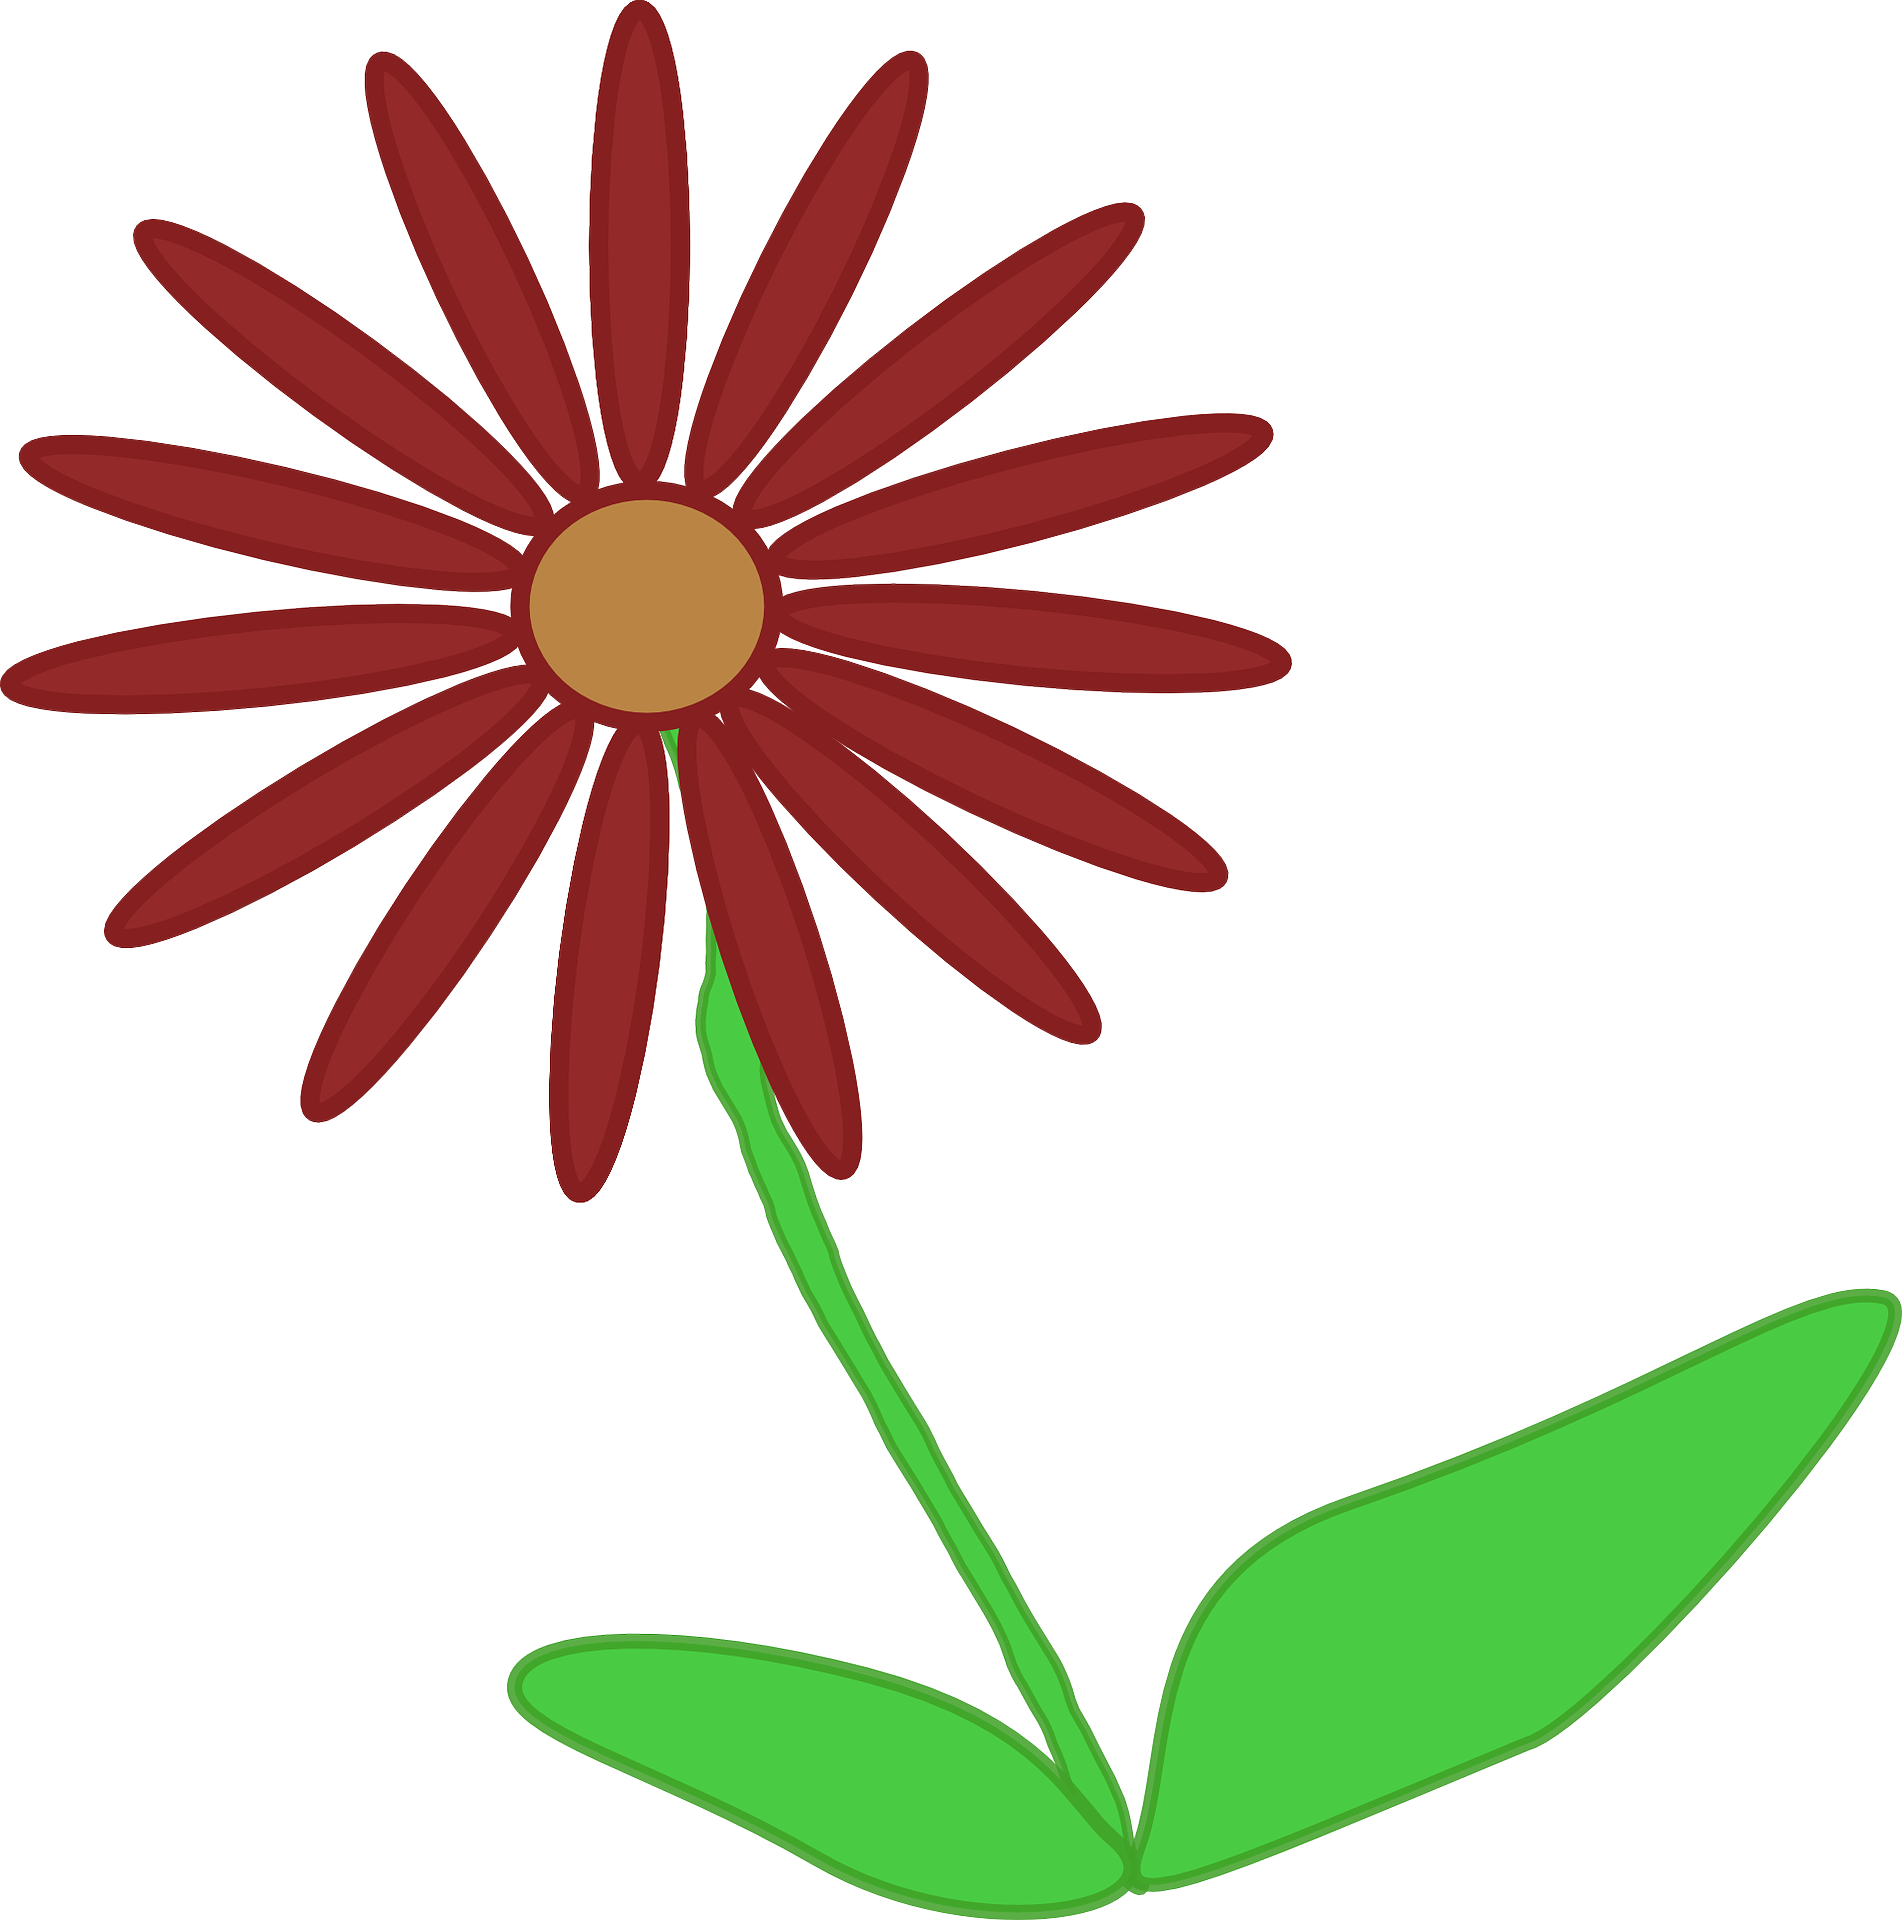 Clip art of flower plant free image download